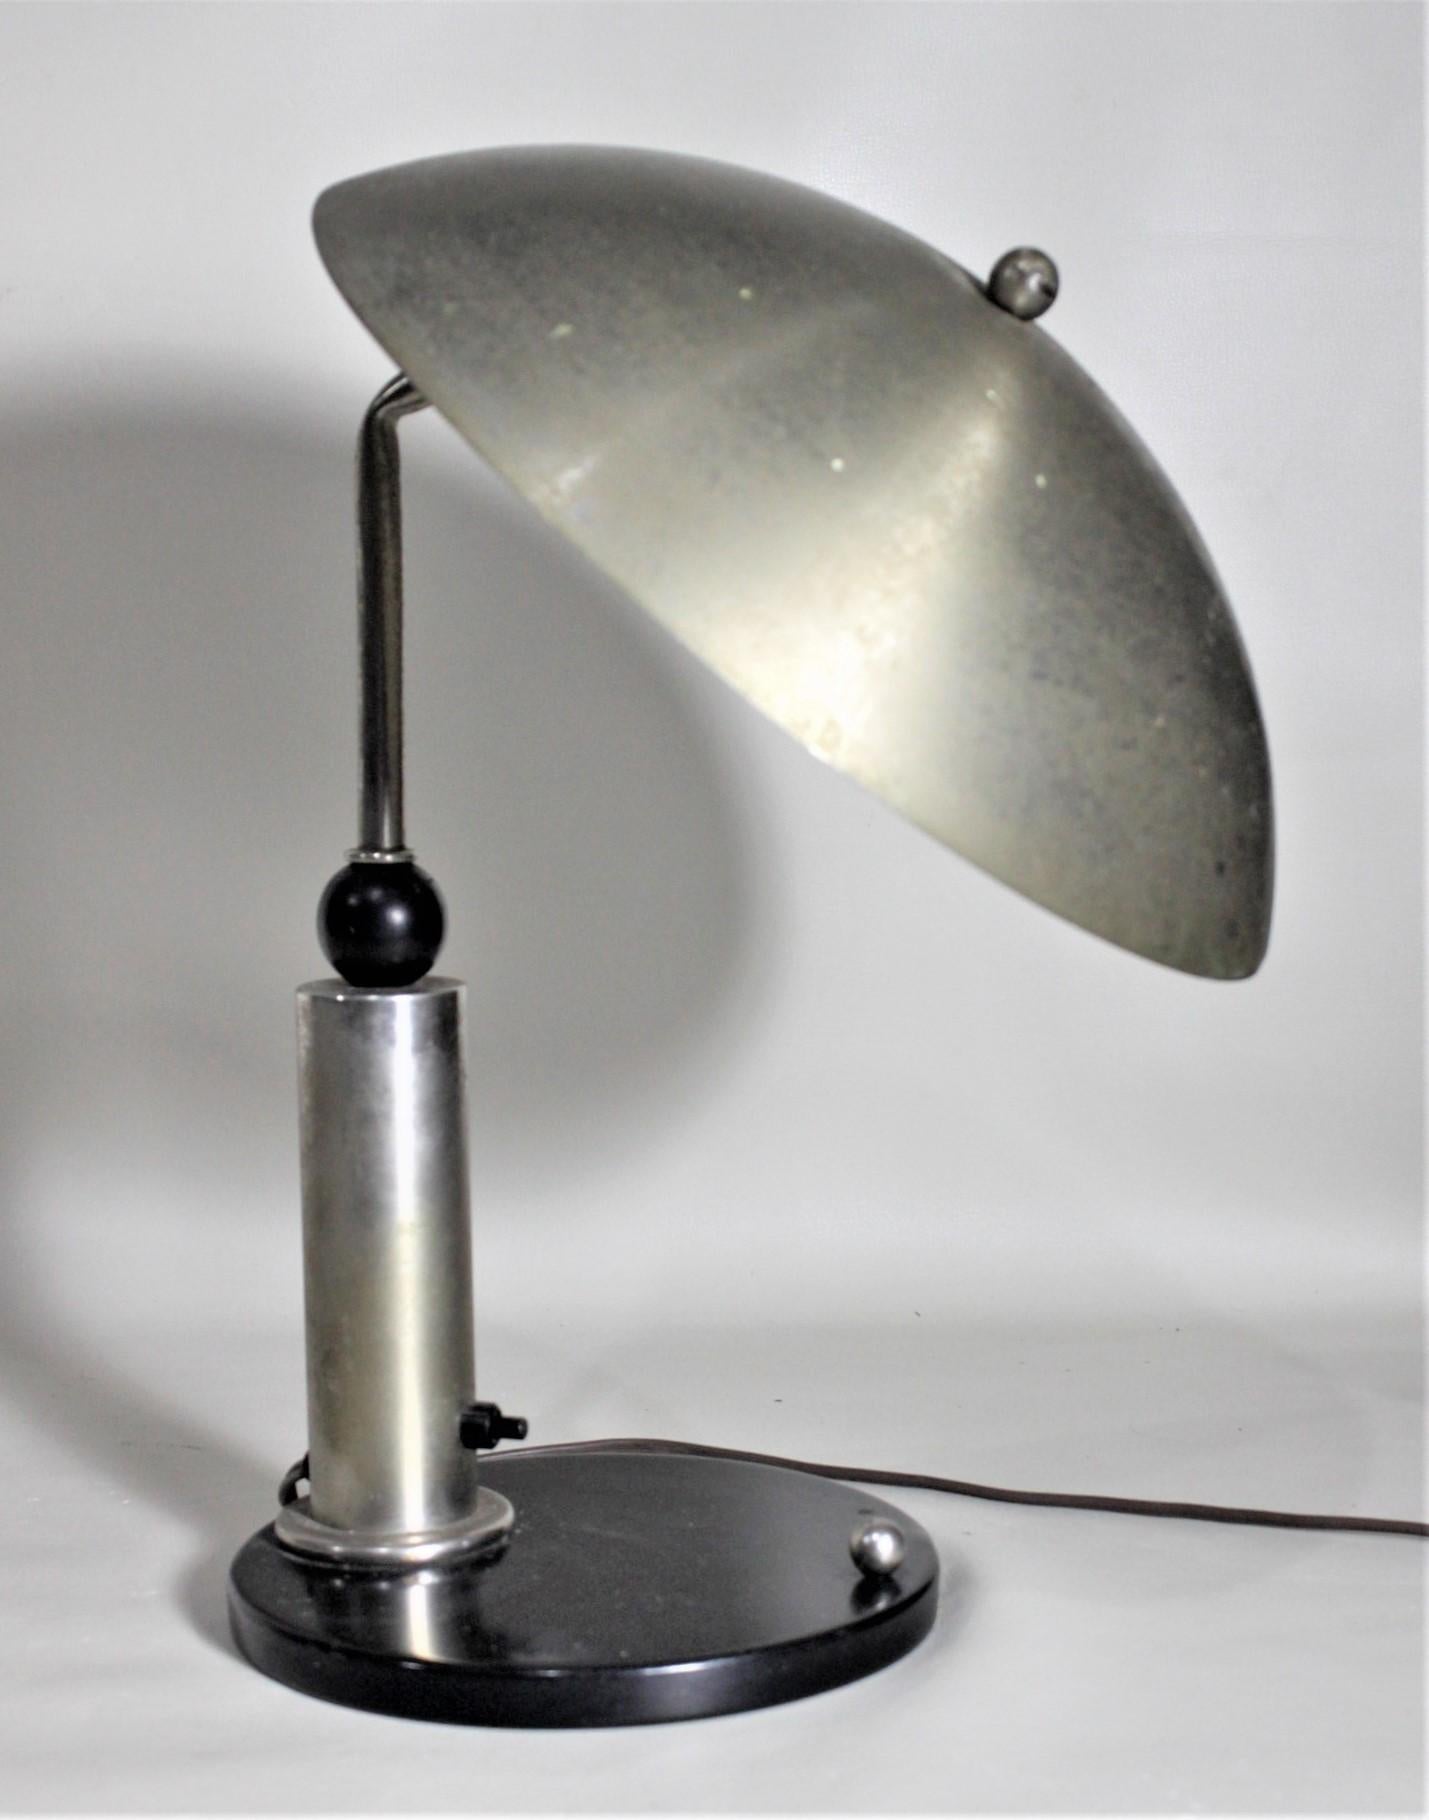 This Mid-Century Modern desk or table lamp is completely unsigned, but believed to have been made in the United States in circa 1965. The lamp is done in the space age, flying saucer style with a brass finished metal shade, tubular post and circular